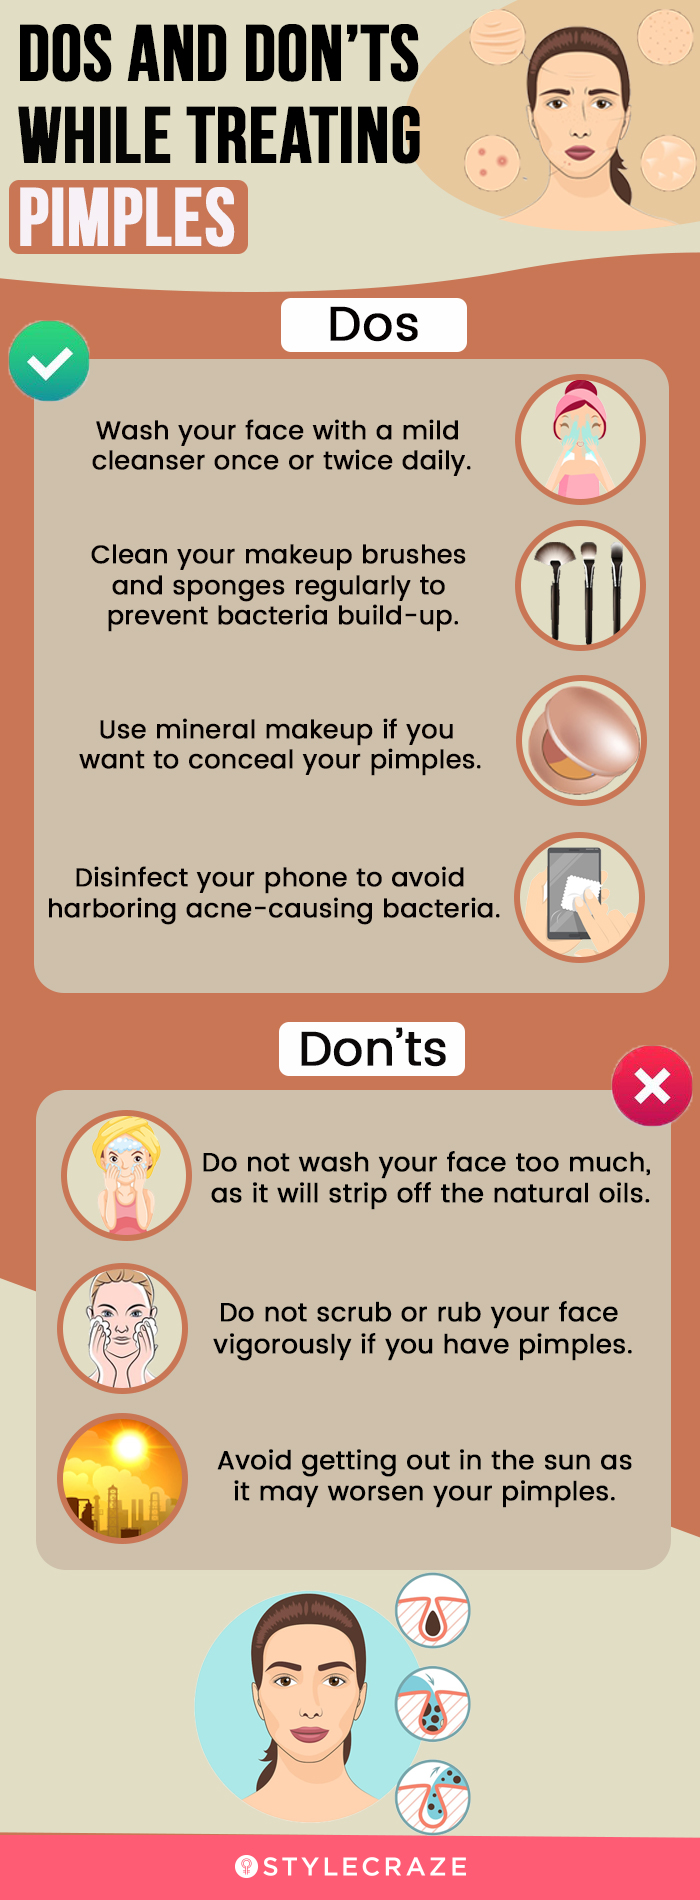 dos and don’ts while treating pimples [infographic]